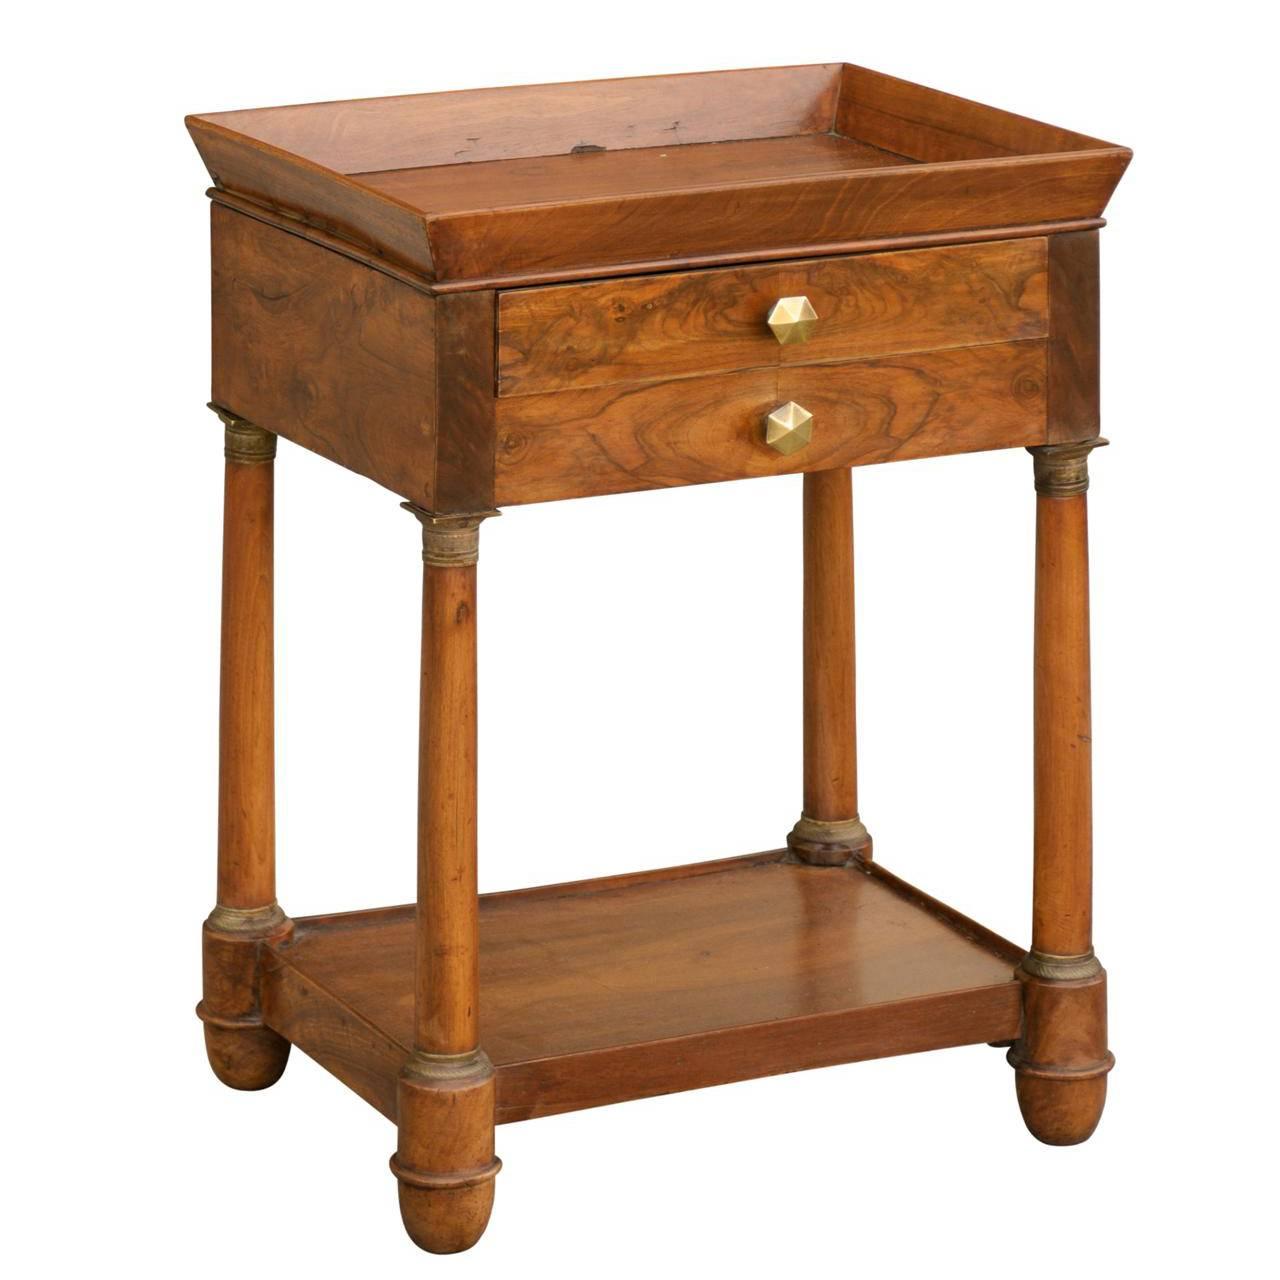 French Empire Walnut Tray Top Table with Drawers, Doric Columns and Bottom Shelf For Sale